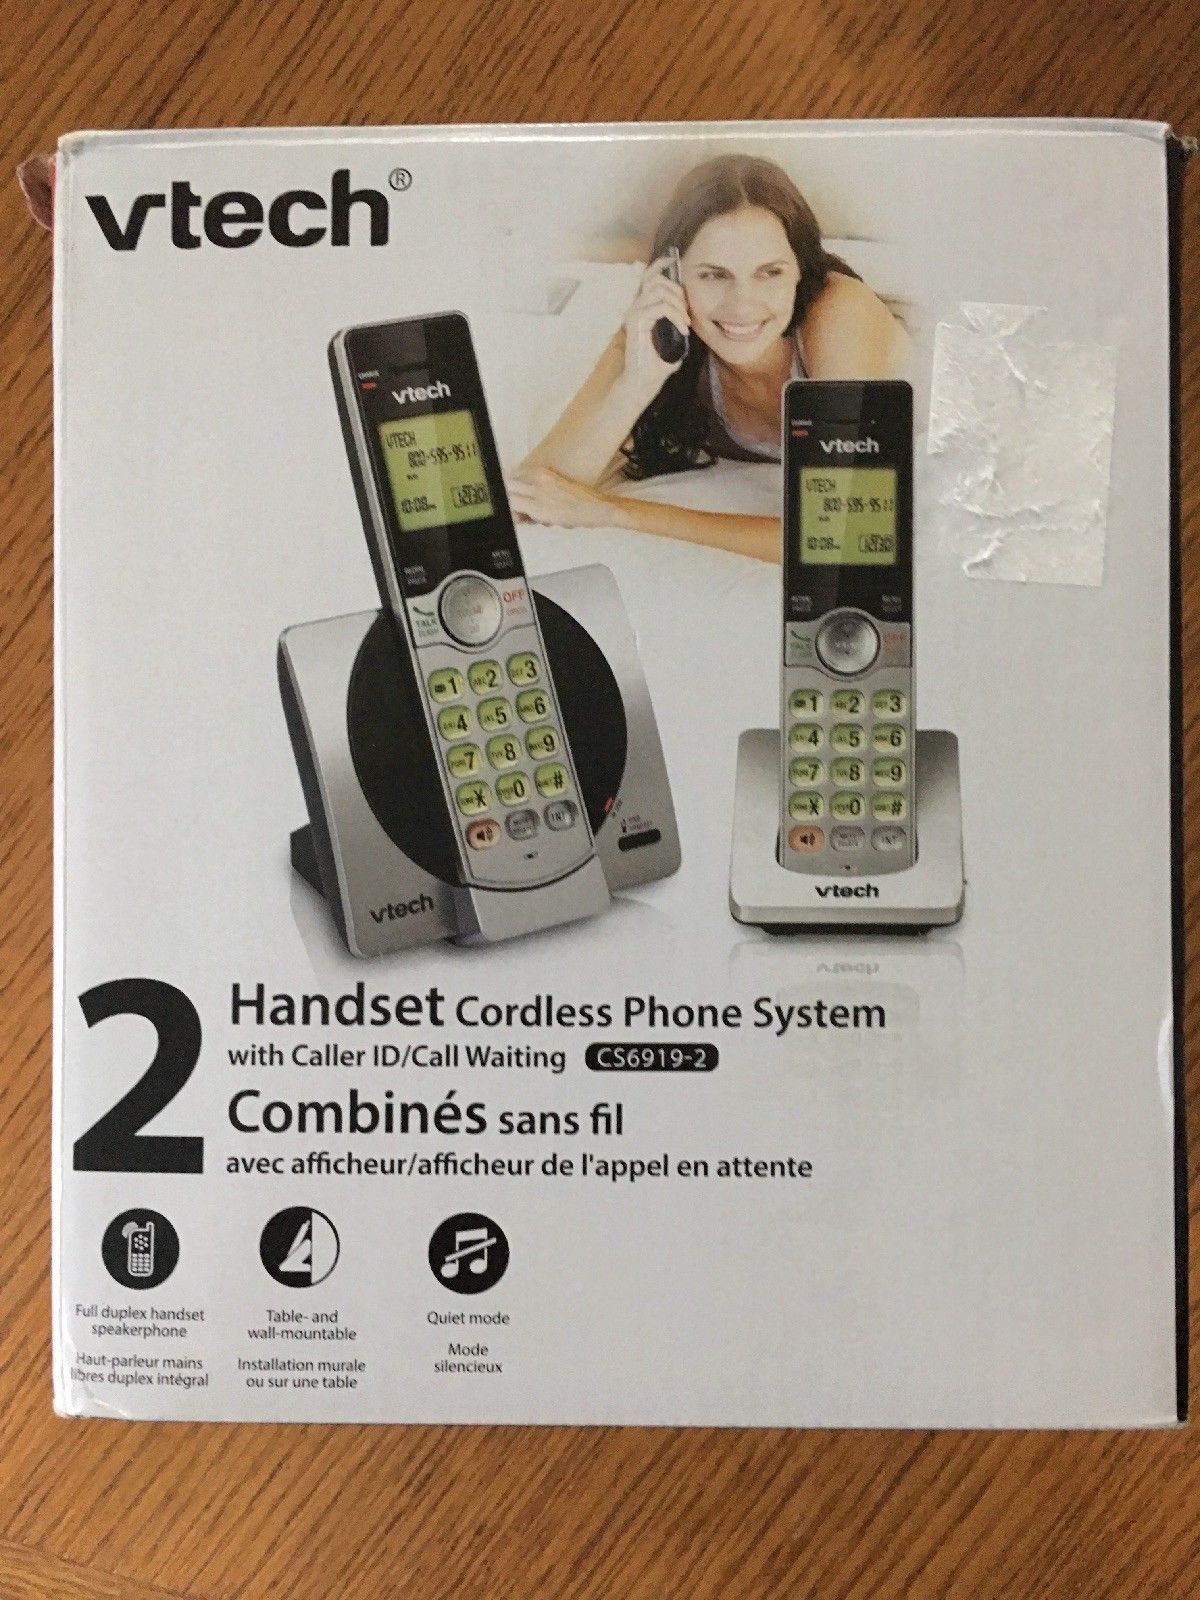 Primary image for VTech CS6919-2 DECT 6.0 Cordless Phone with 2 Full Duplex Handsets - Silver